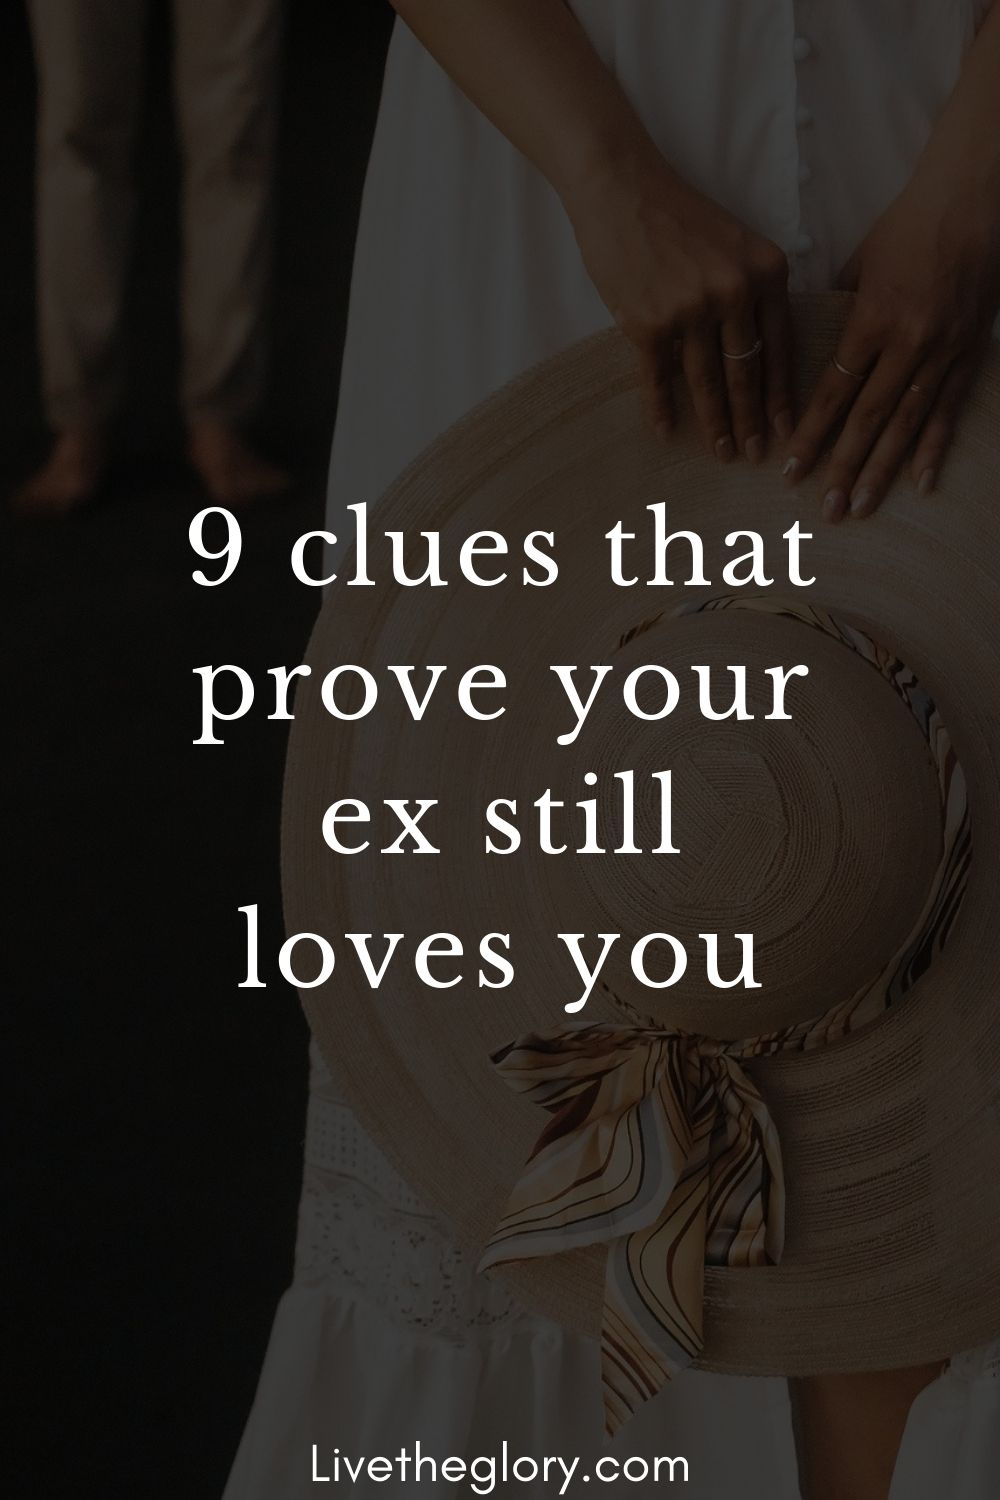 9 clues that prove your ex still loves you - Live the glory